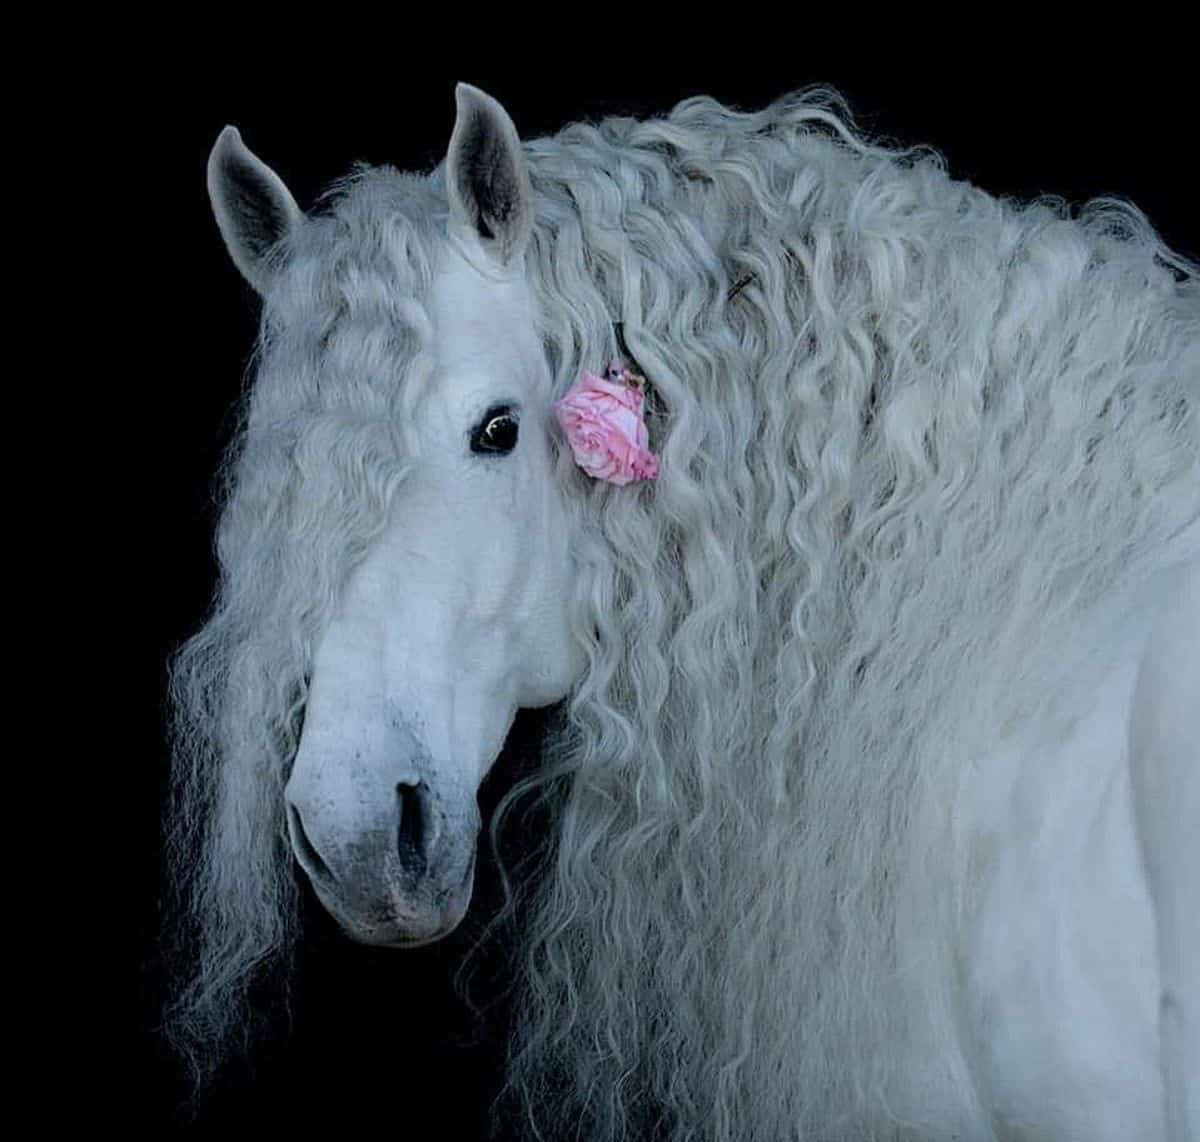 A portrait of a gray horse with a curly mane with a small rose.